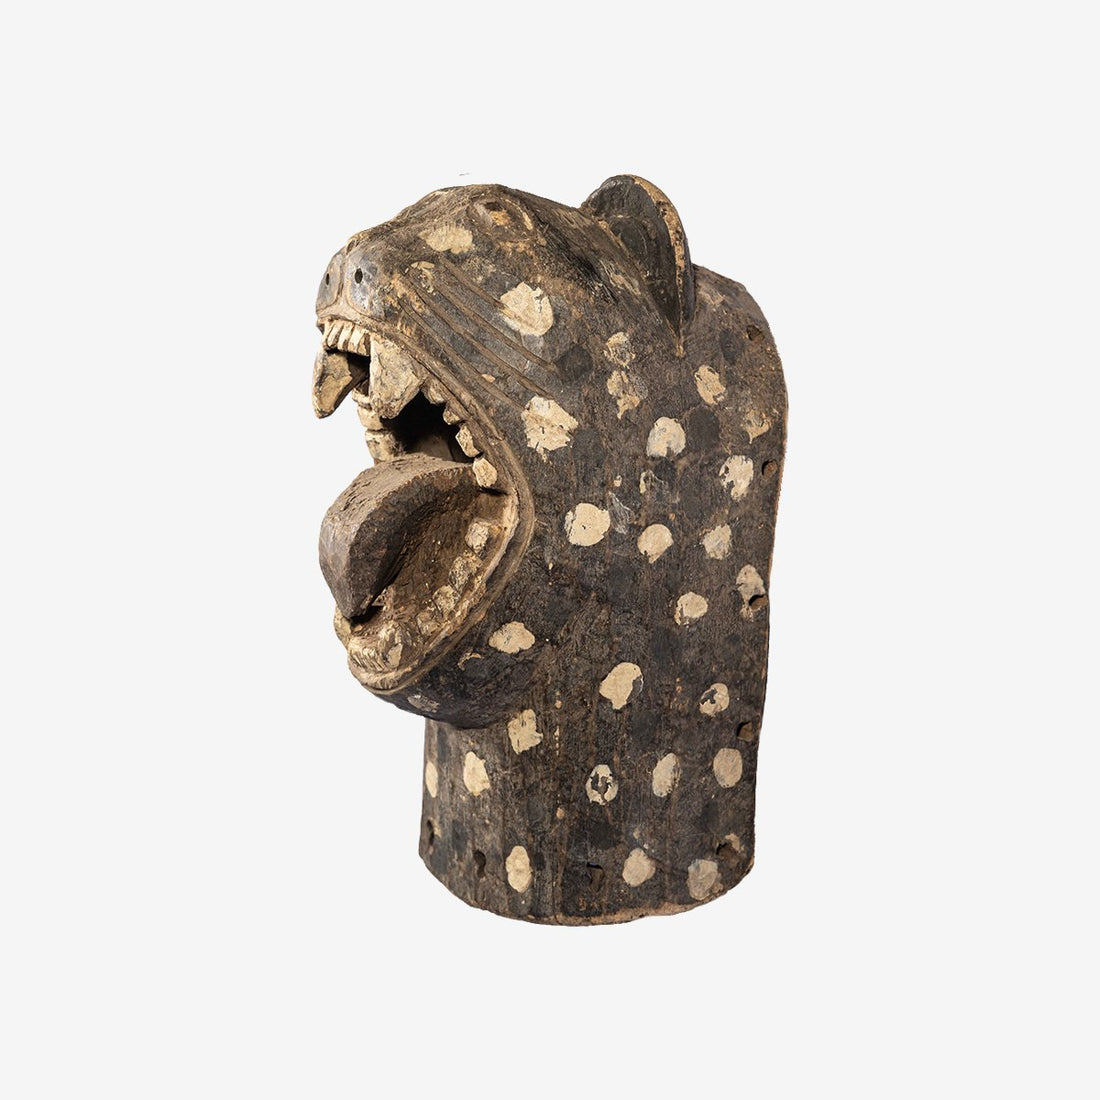 Luba Leopard Mask - Authentic African handicrafts | Clothing, bags, painting, toys & more - CULTURE HUB by Muthoni Unchained